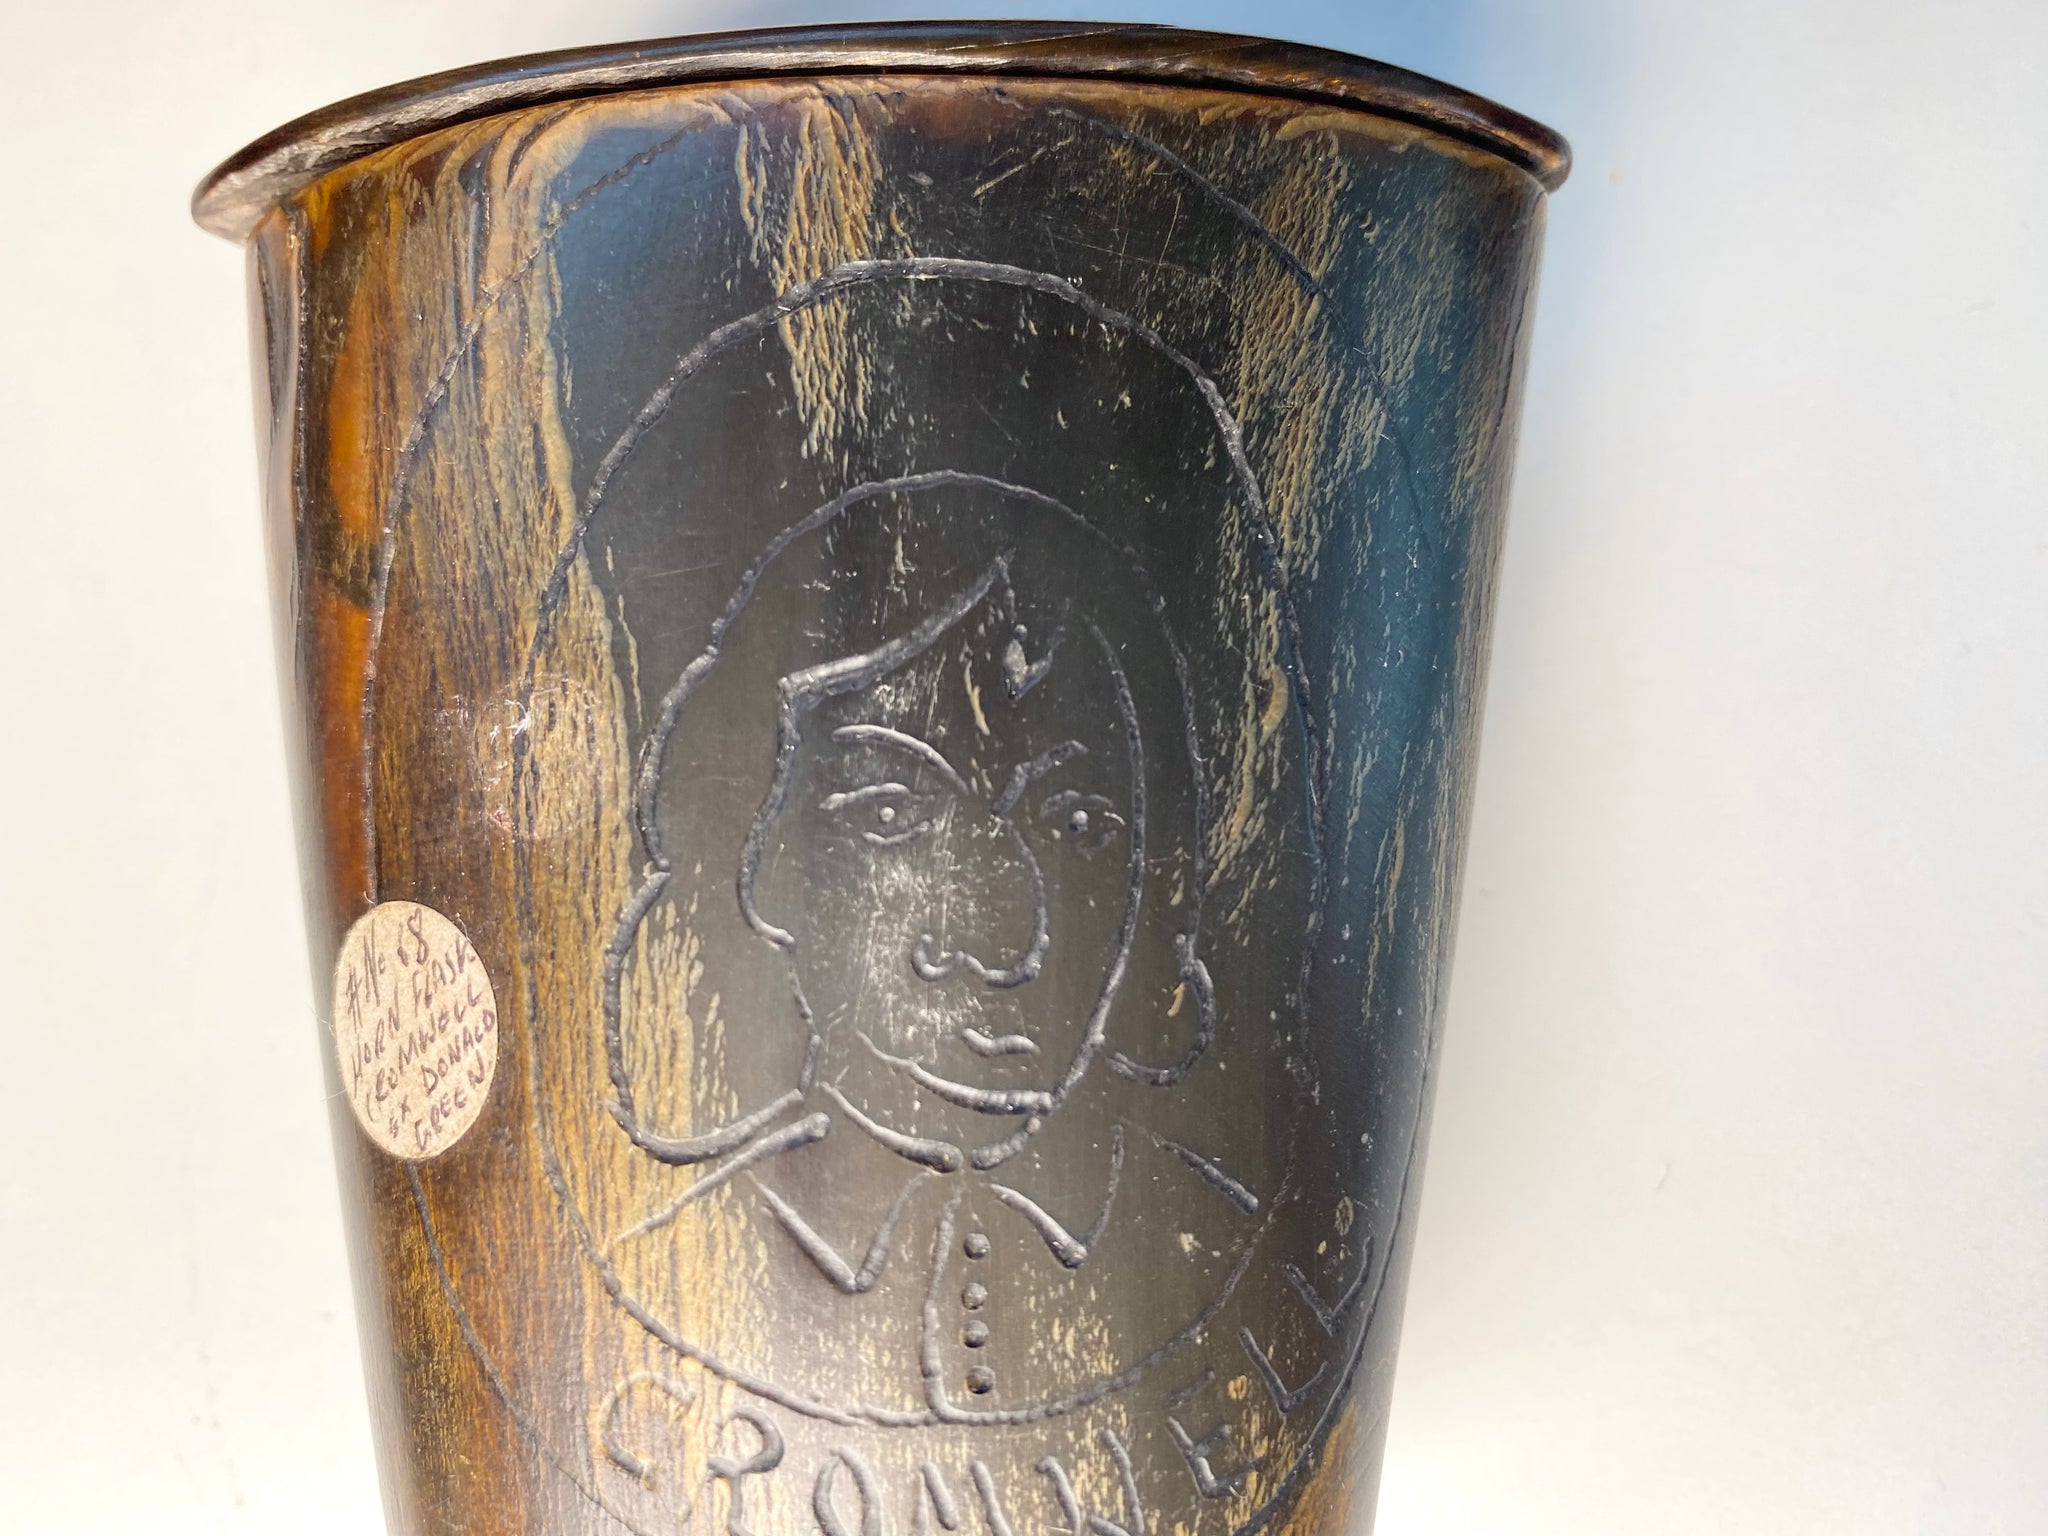 An Intriguing Late 18th-19th Century Horn Snuff Mull Depicting A Folk Art Engraved Image Of Oliver Cromwell - Source Vintage